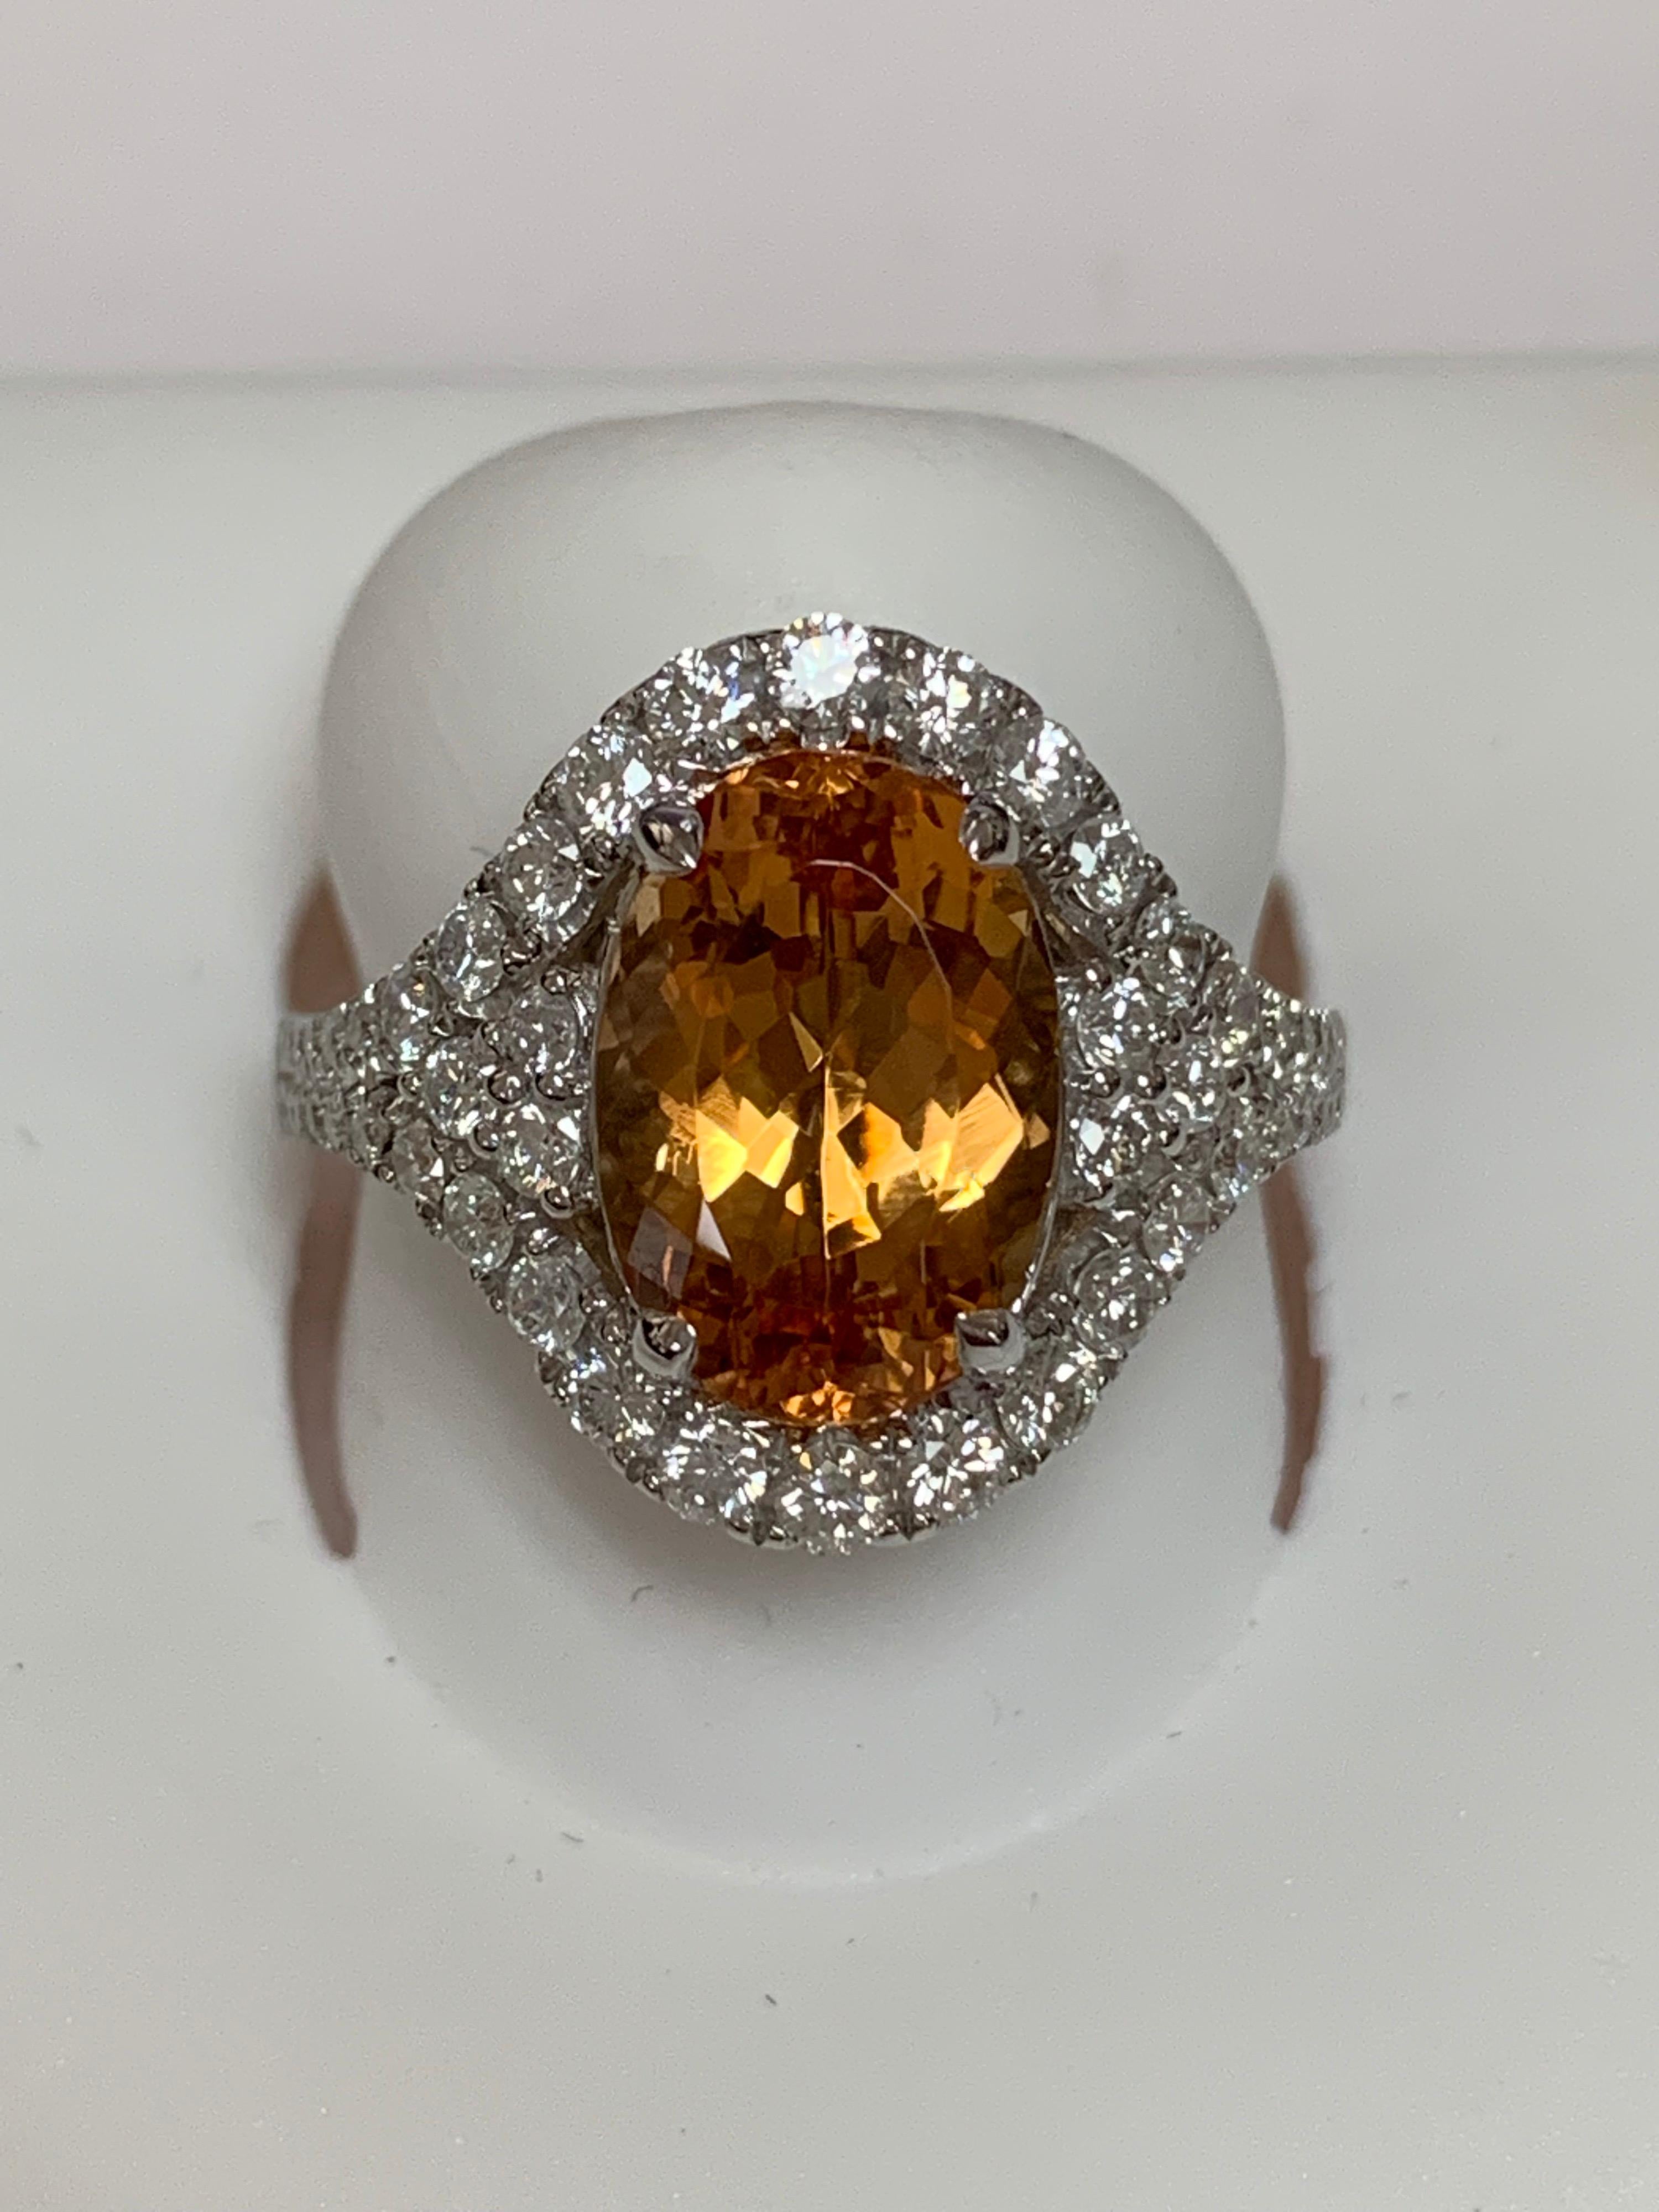 Oval imperial topaz 4.02 Carat and 0.84 Carat round white diamonds set in a 14 Karat is a one of  a kind hand crafted ring. The ring is size 7 but can be resized if needed.